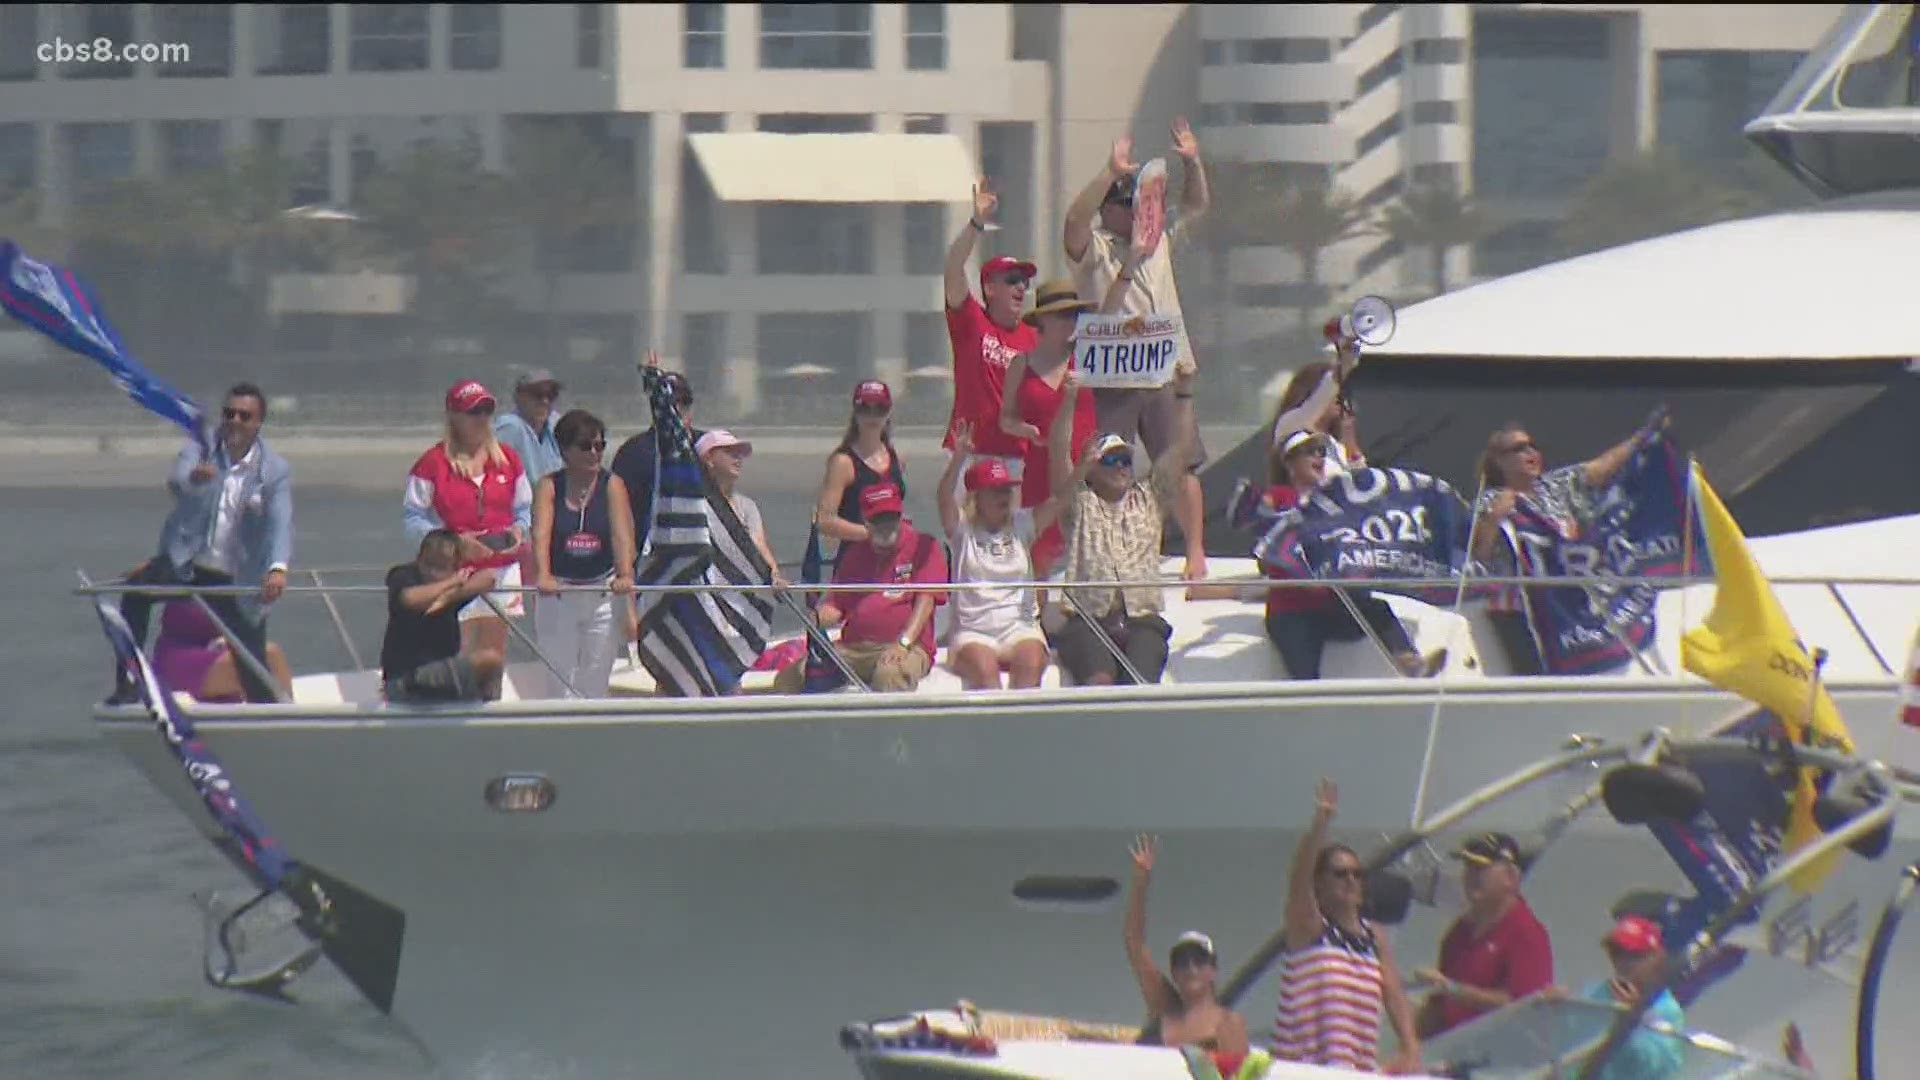 Thousands of boats took to the water Sunday in San Diego in support of the president.